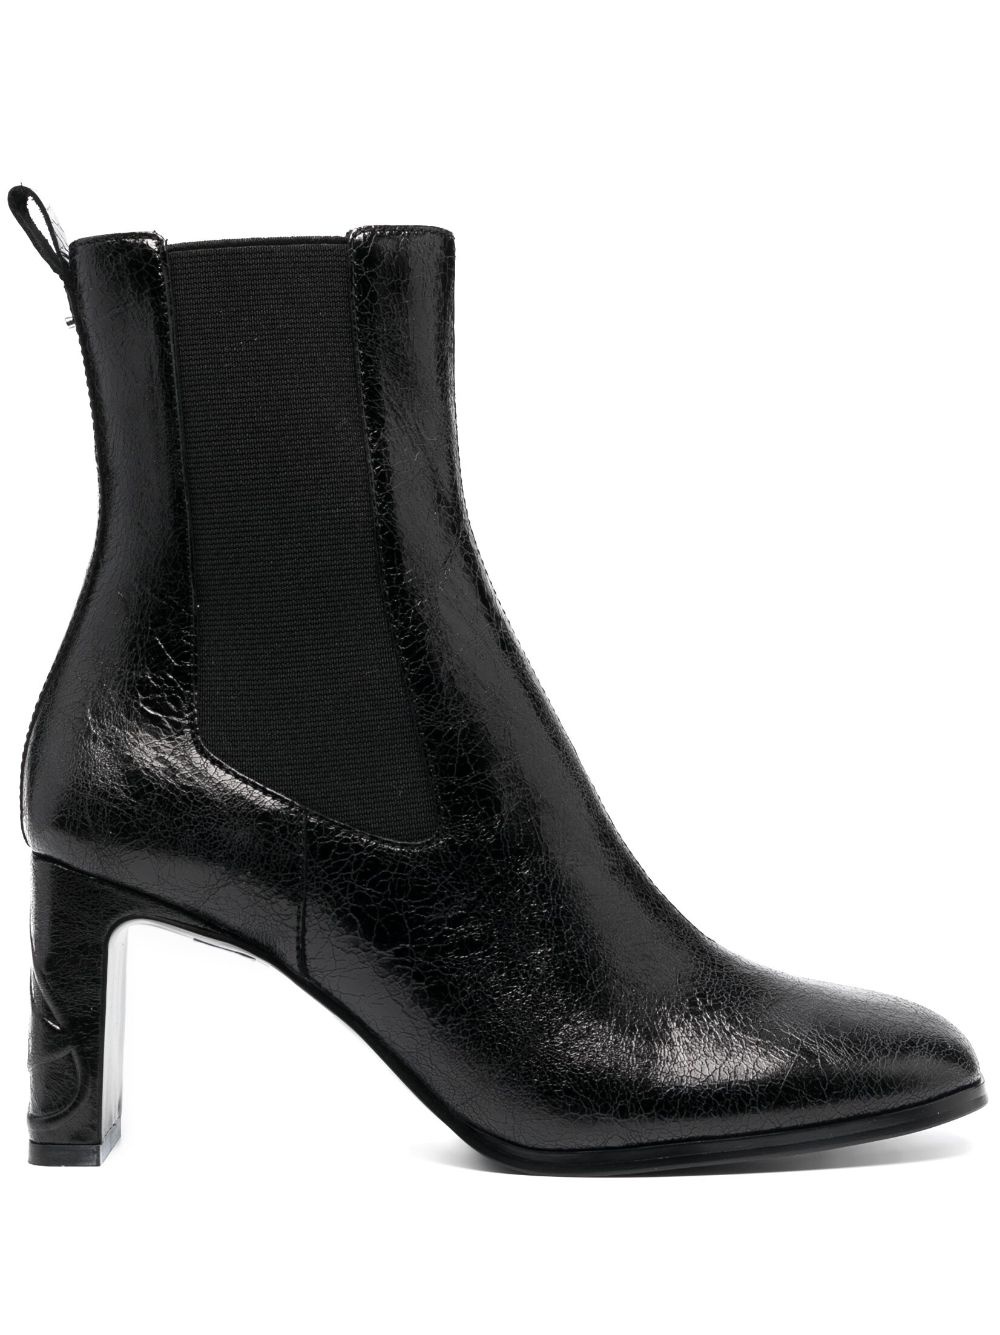 D-GIOVE AB 75mm ankle boots - 1